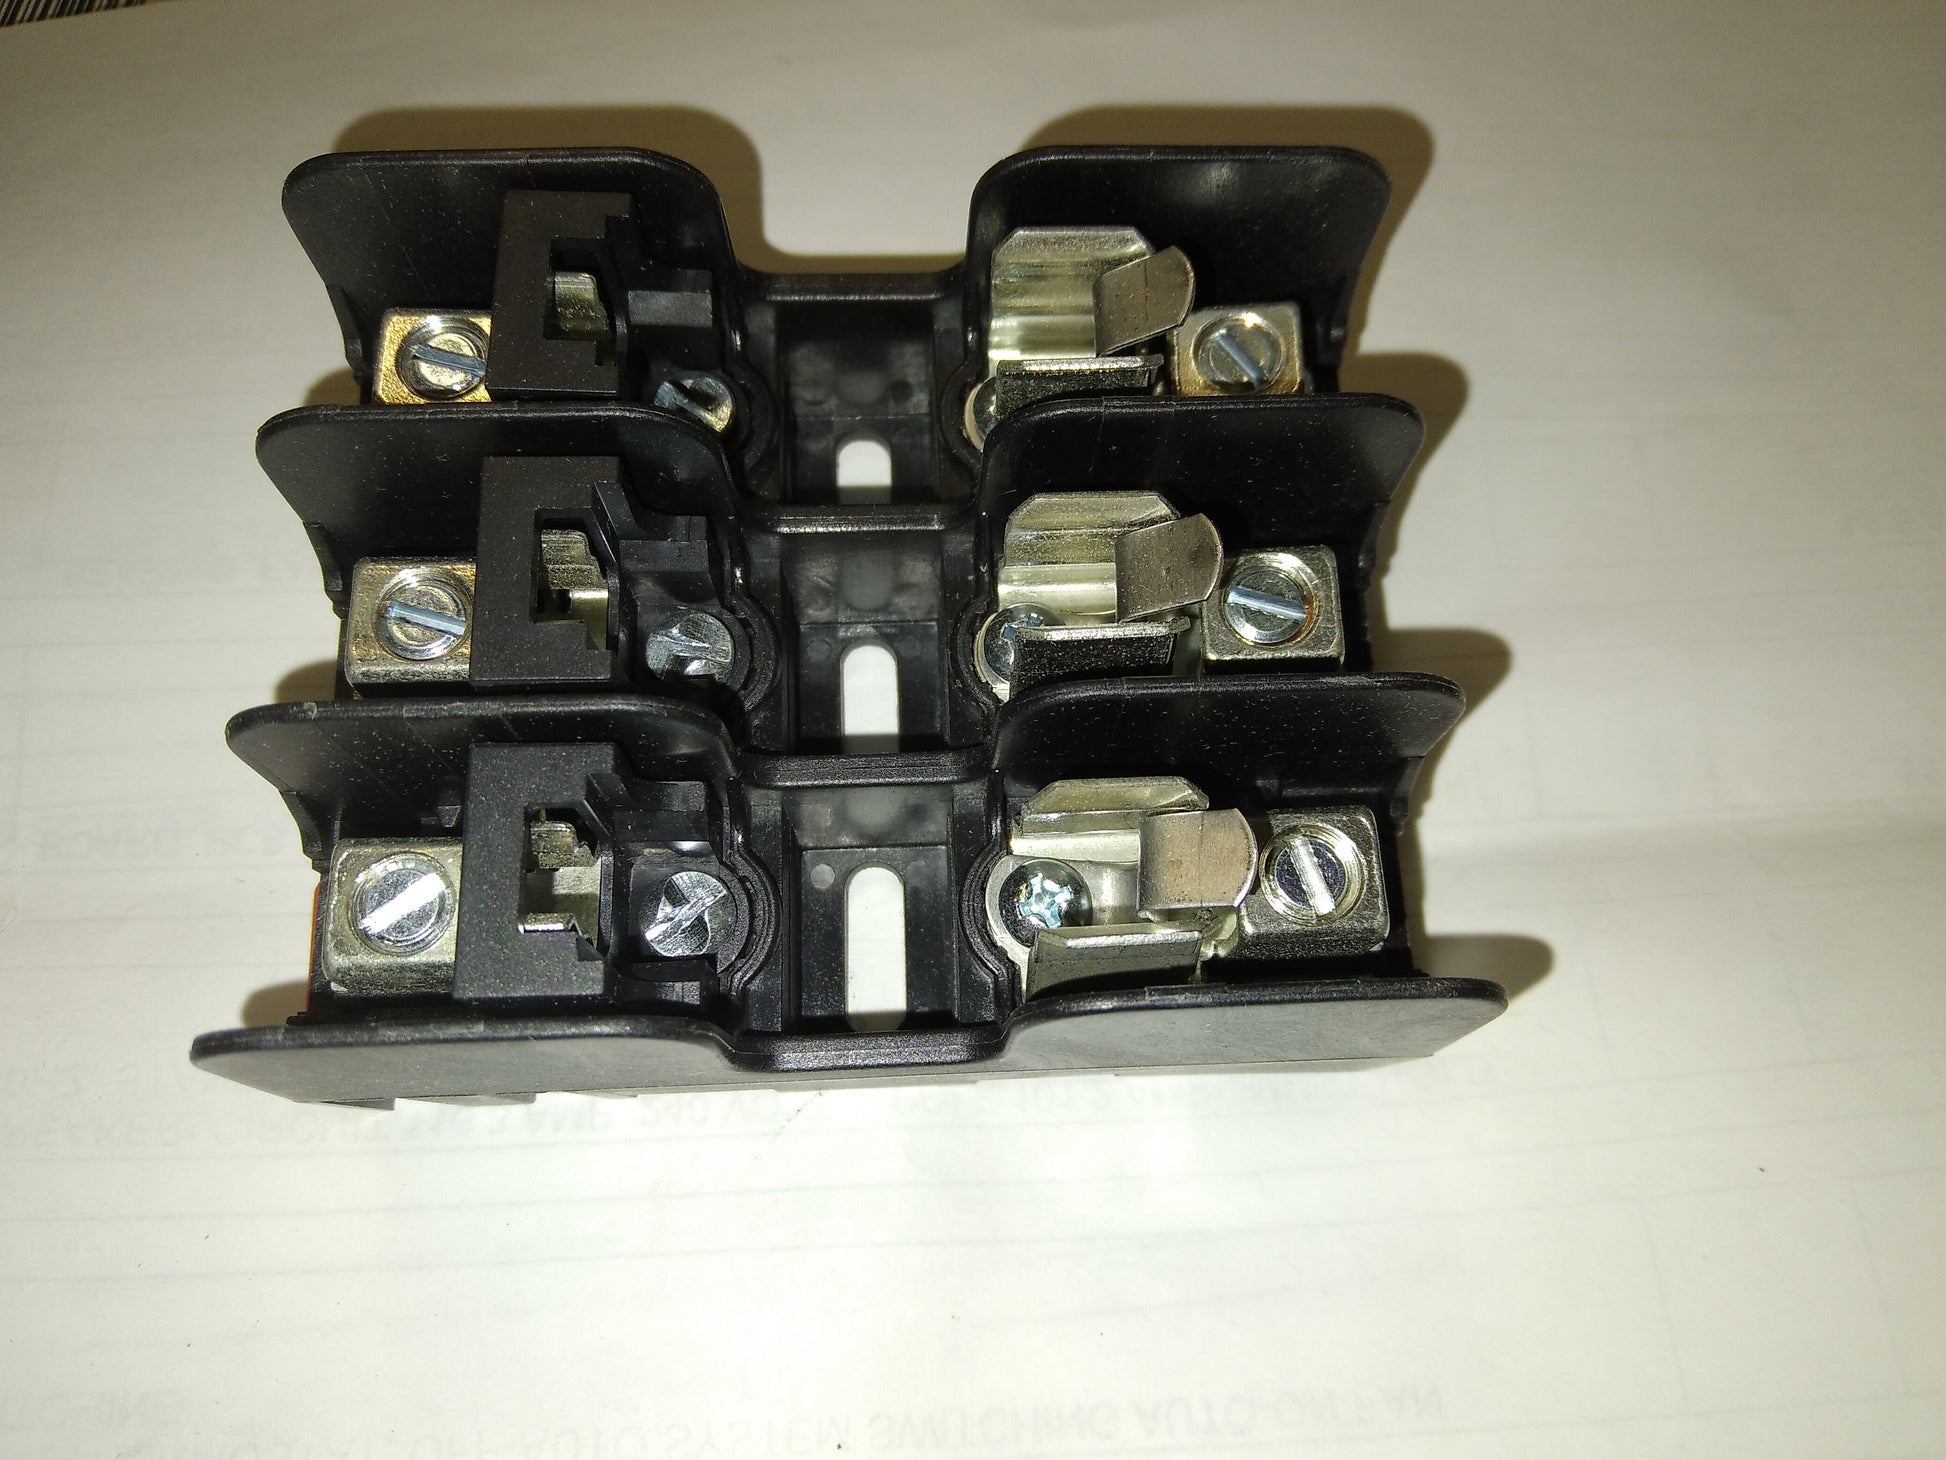 CIRCUIT PROTECTION FUSE BLOCK 600V 30A 3 POLE DIN MOUNT 